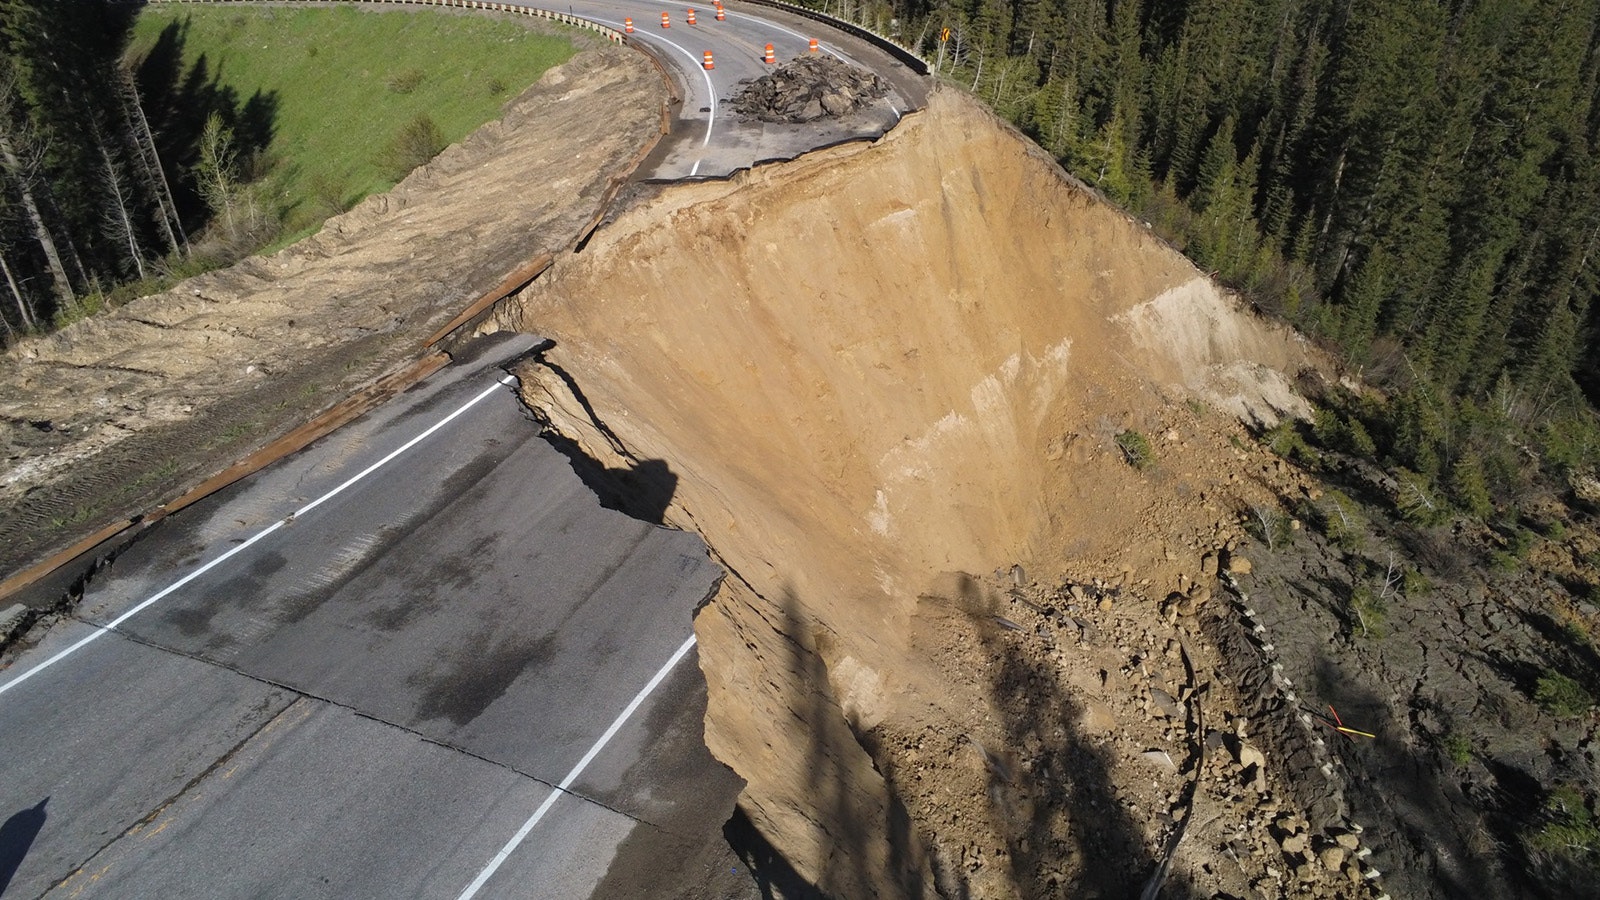 A “catastrophic failure” of Wyoming Highway 22 over Teton Pass overnight Friday saw a huge section wash down the mountain. A long closure of the “lifeline” between Jackson and Victor, Idaho, is expected.